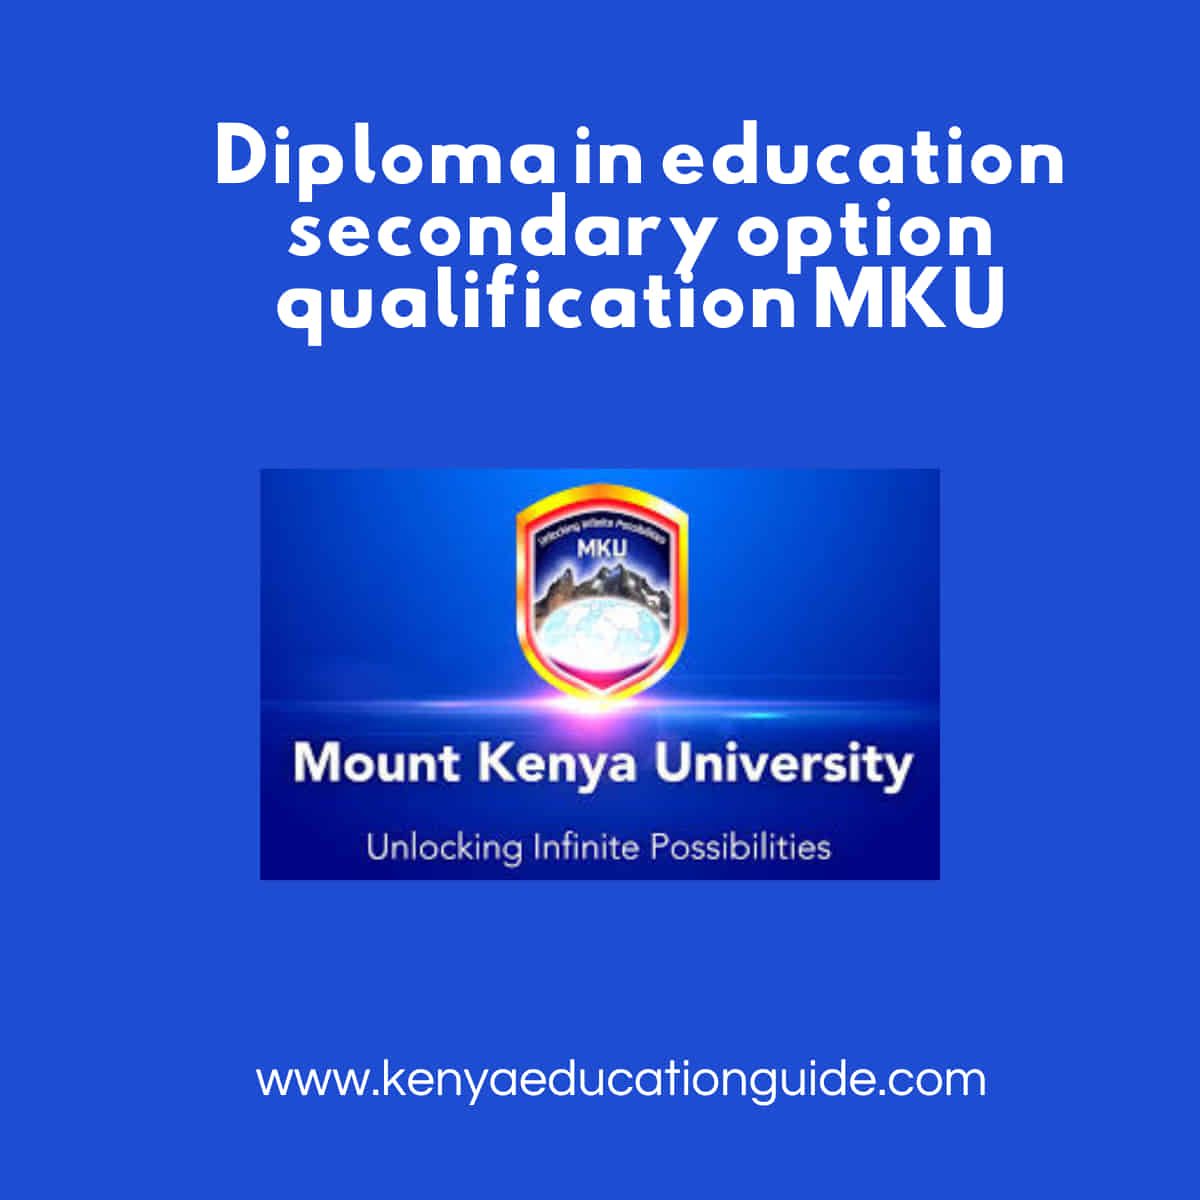 Diploma in education secondary option qualification MKU